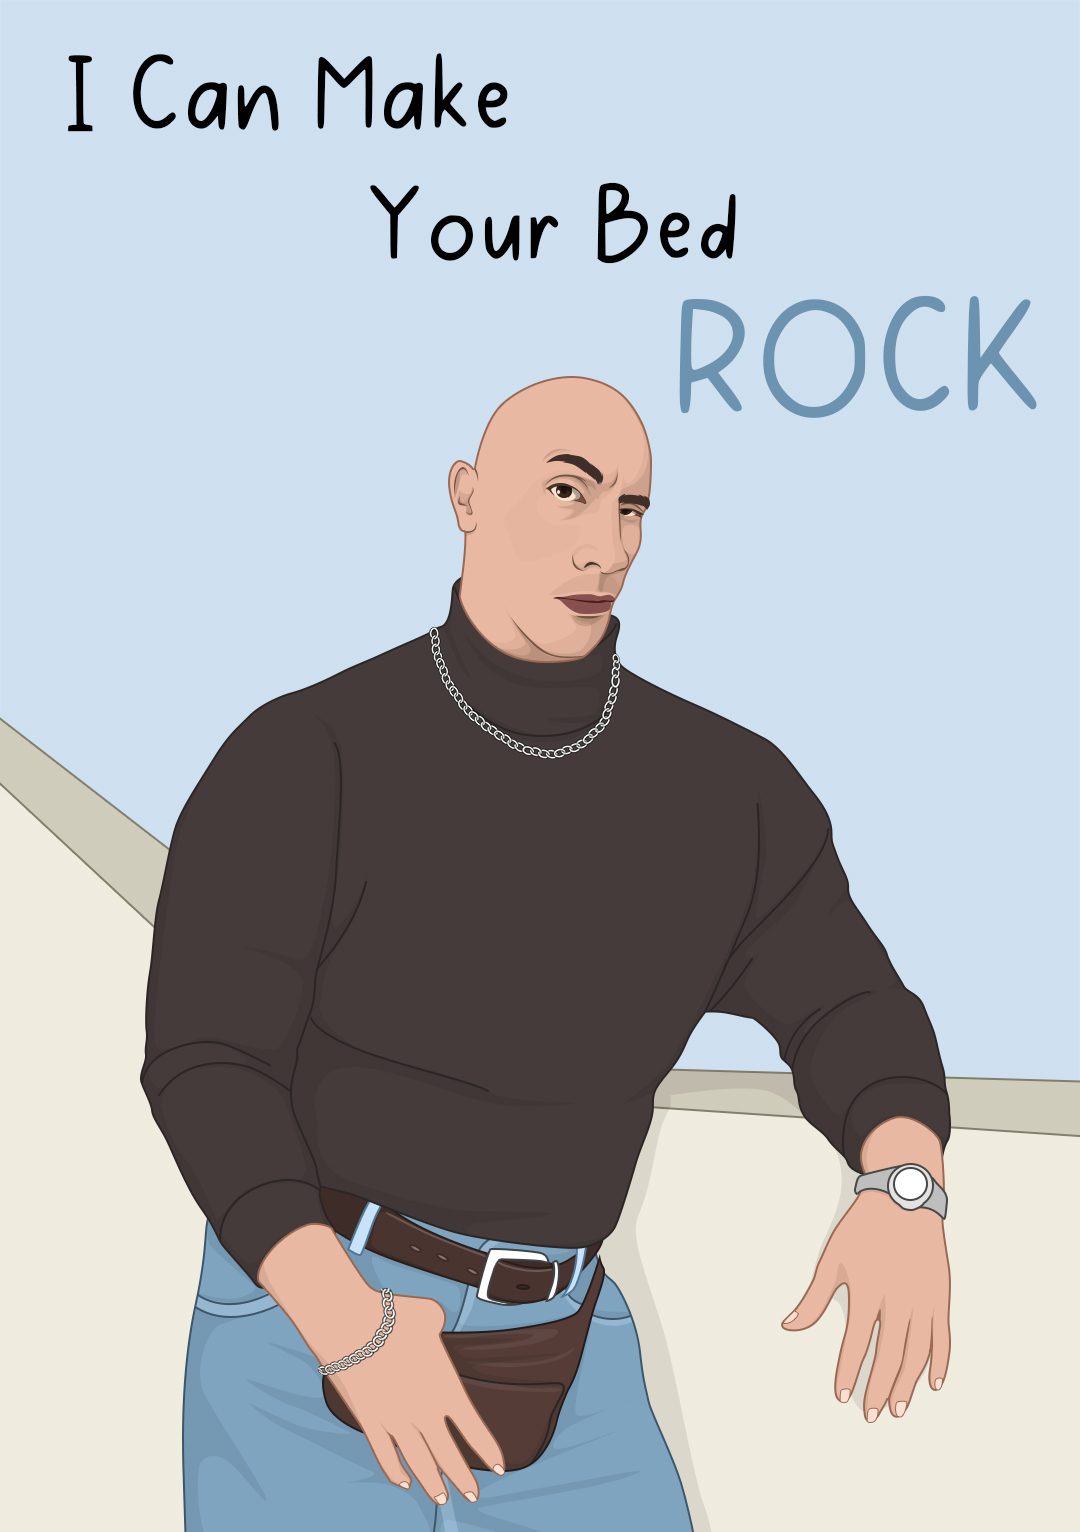 I Can Make Your Bed Rock - Funny Love Card